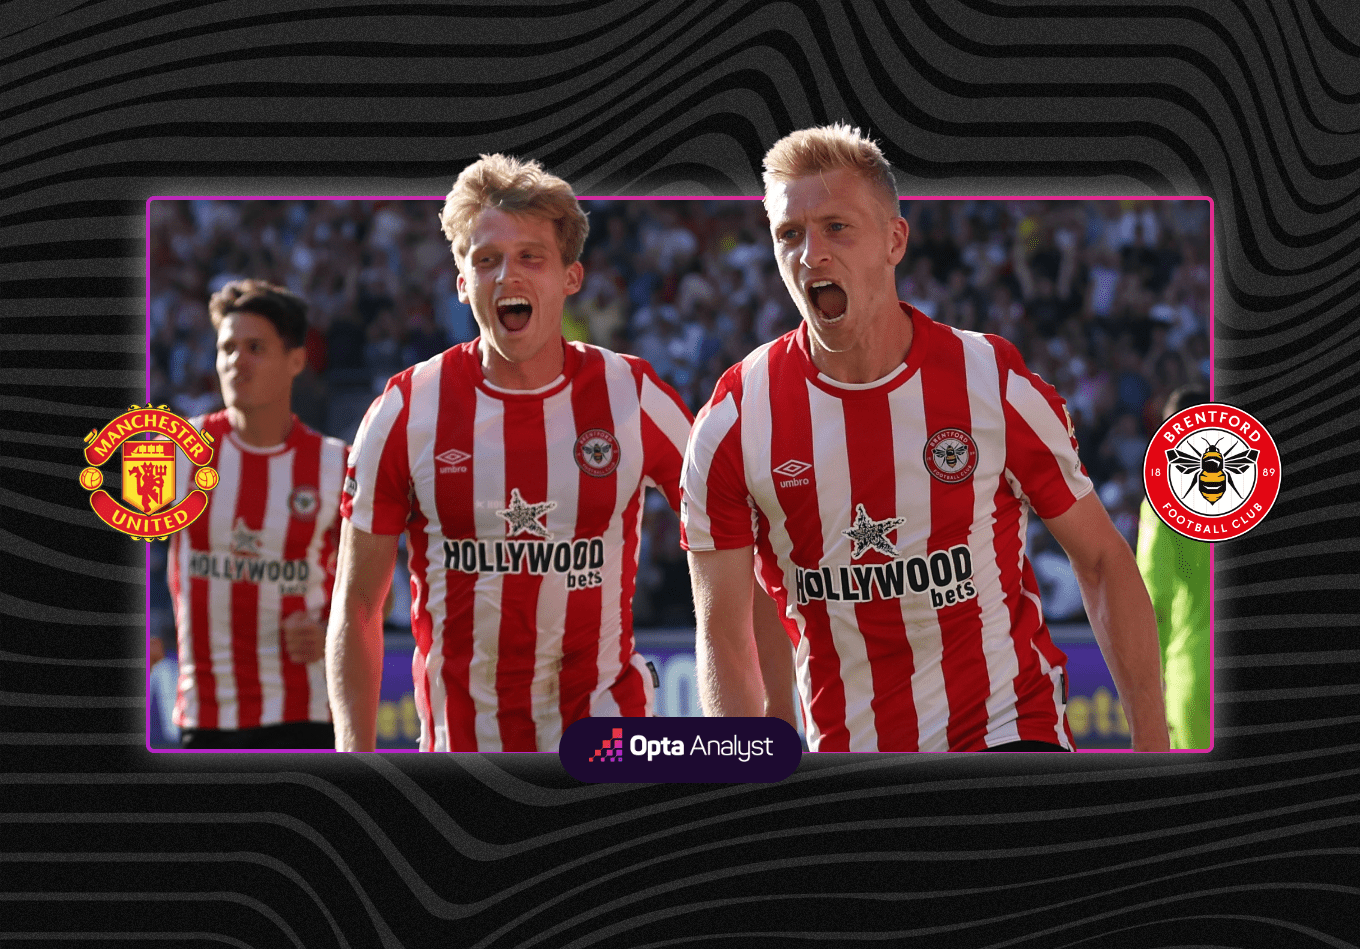 Brentford FC on X: FIFA 21 Out Now and looking 🔥! Download your Brentford  cover here  #FIFA21 @EASPORTSFIFA #BrentfordFC   / X